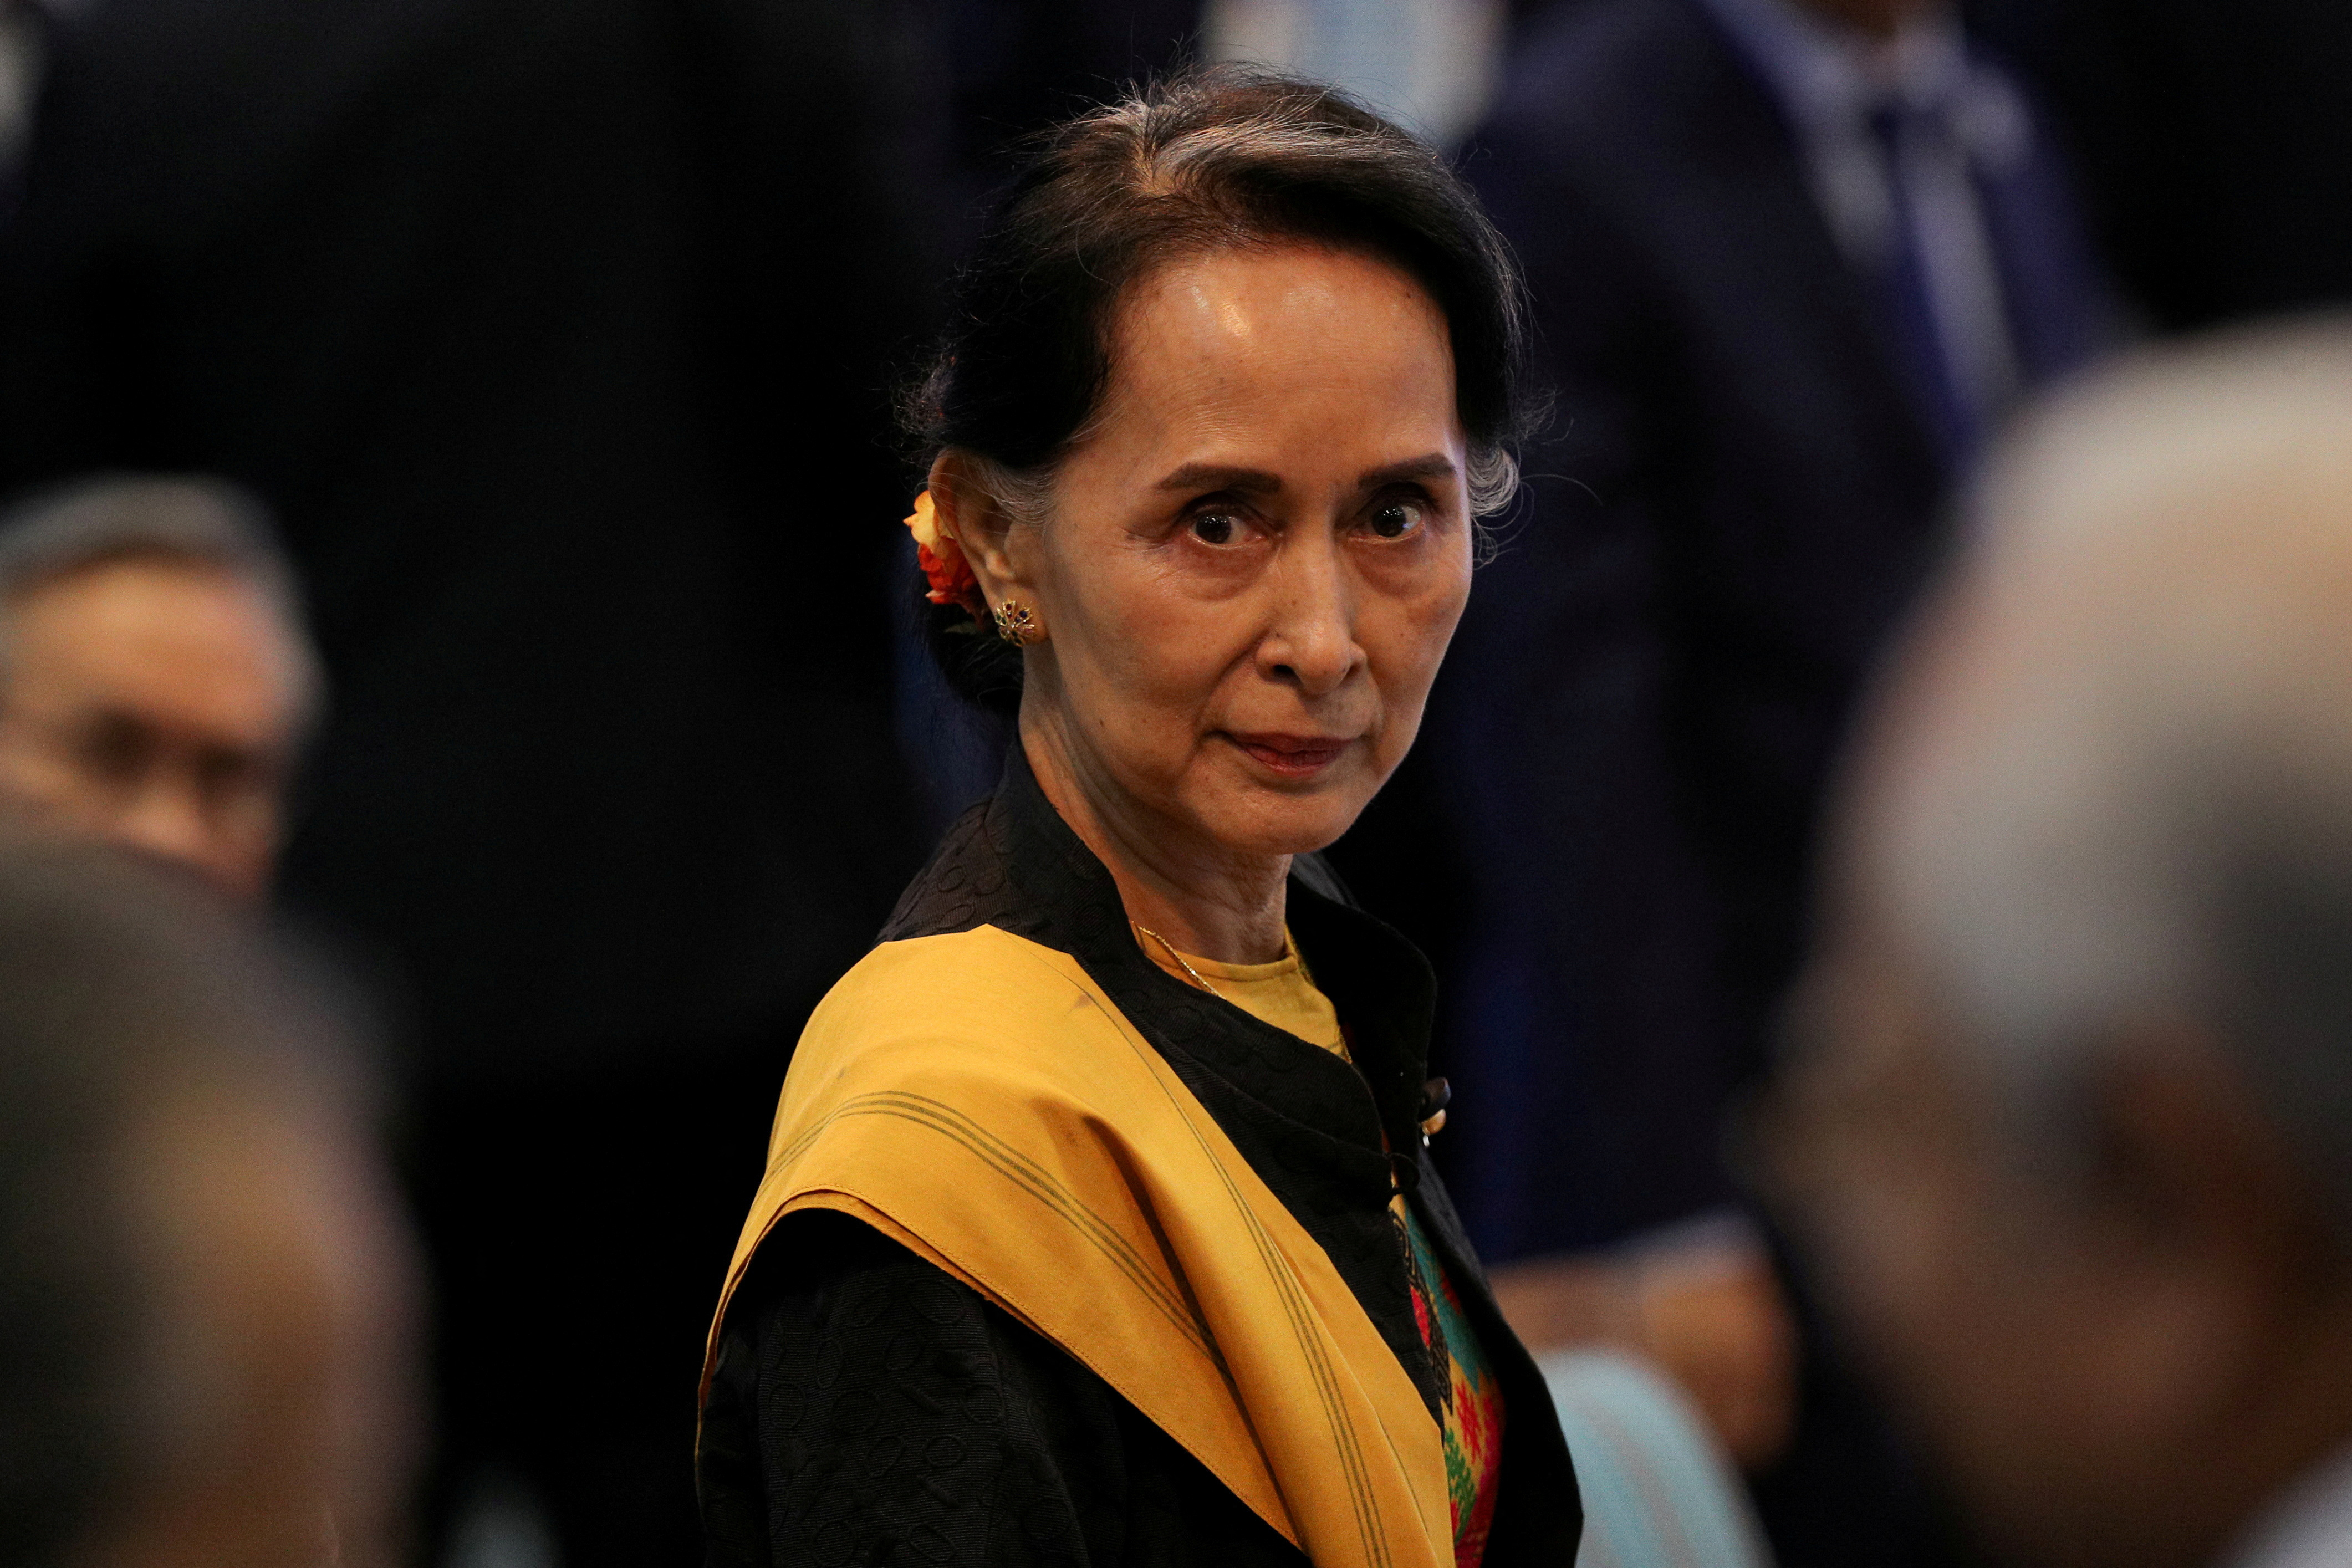 Myanmar State Counselor Suu Kyi attends the opening session of the 31st ASEAN Summit in Manila